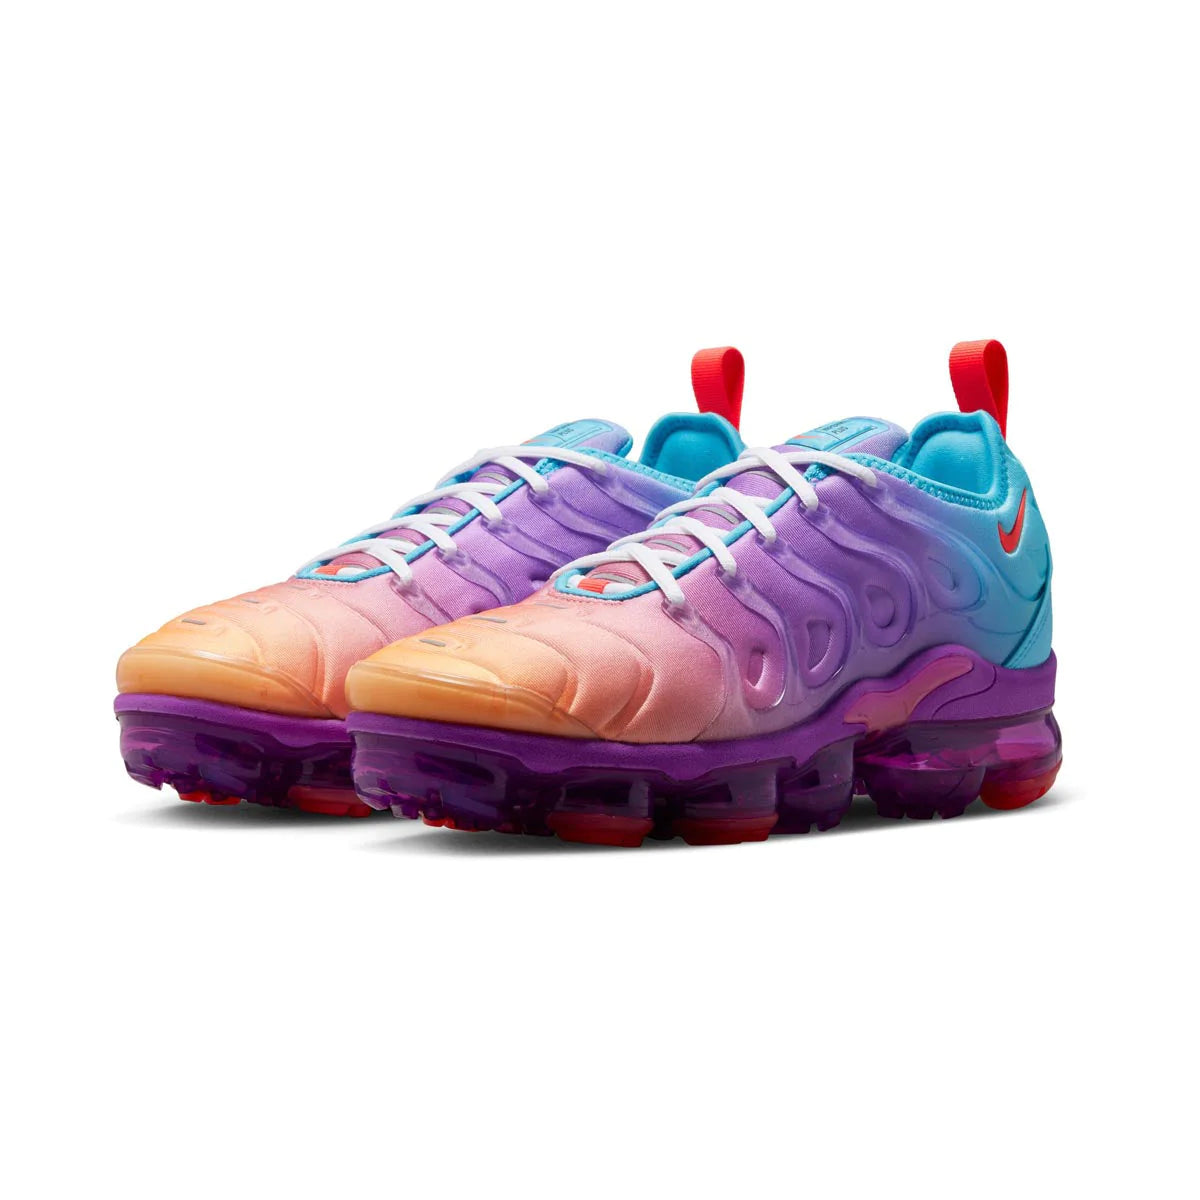 Appartement omdraaien dennenboom Discover the Latest Nike VaporMax Plus Sneakers - The Perfect Blend of -  Millennium Shoes